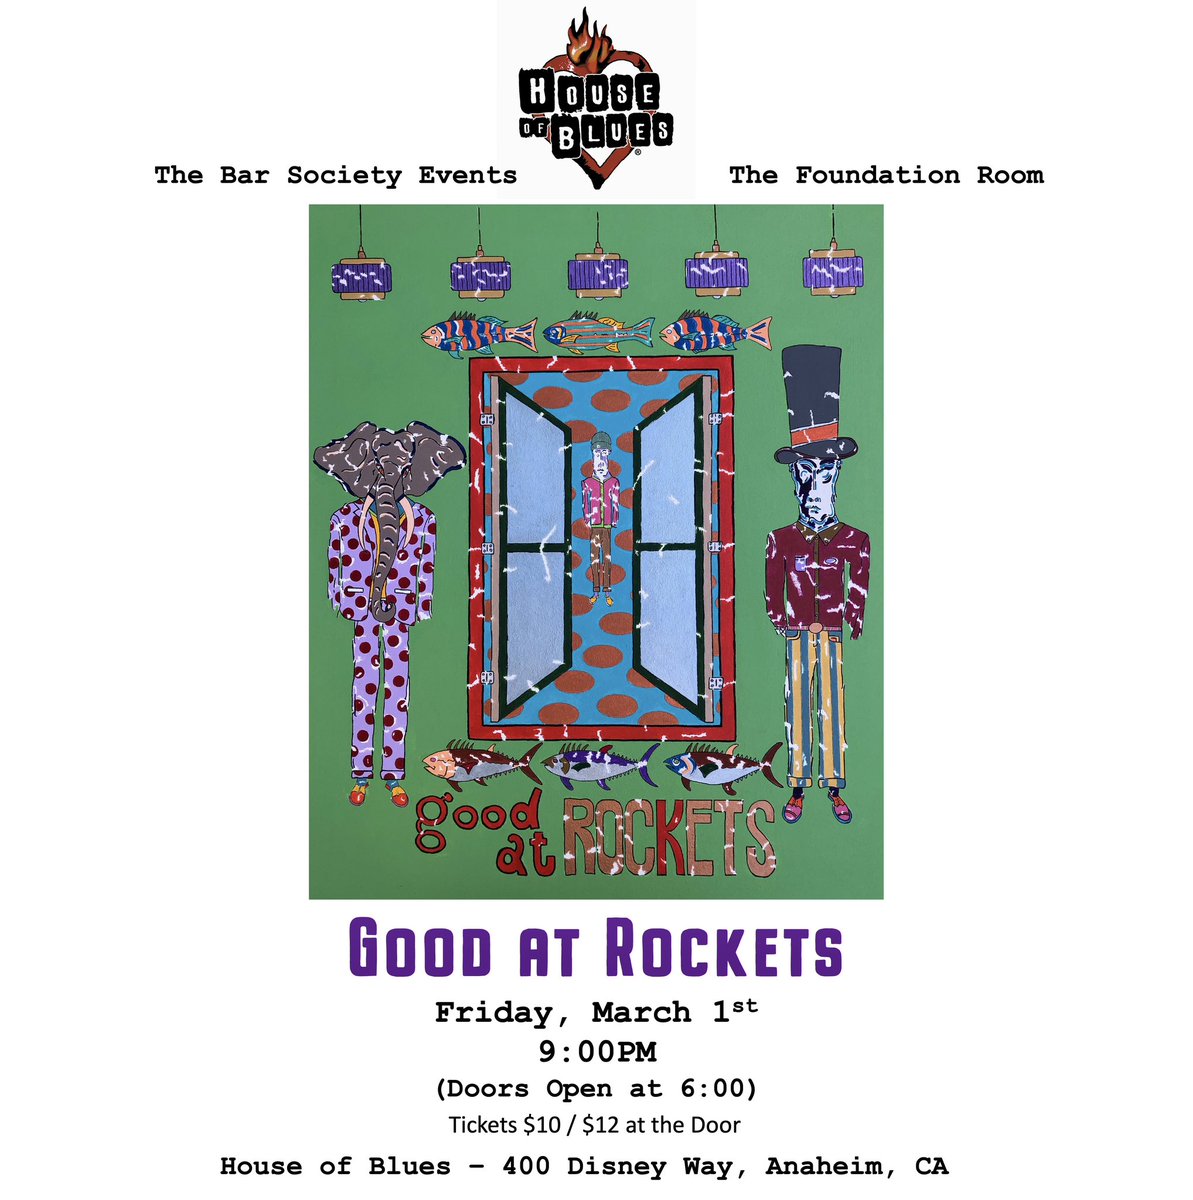 Our band Good at Rockets will be at The House of Blues Anaheim - Foundation Room on Friday, March 1st at 9:00PM. Tix $10 Advanced / $12 at the door. DM me for tickets. Come on down - all kinds of fun!